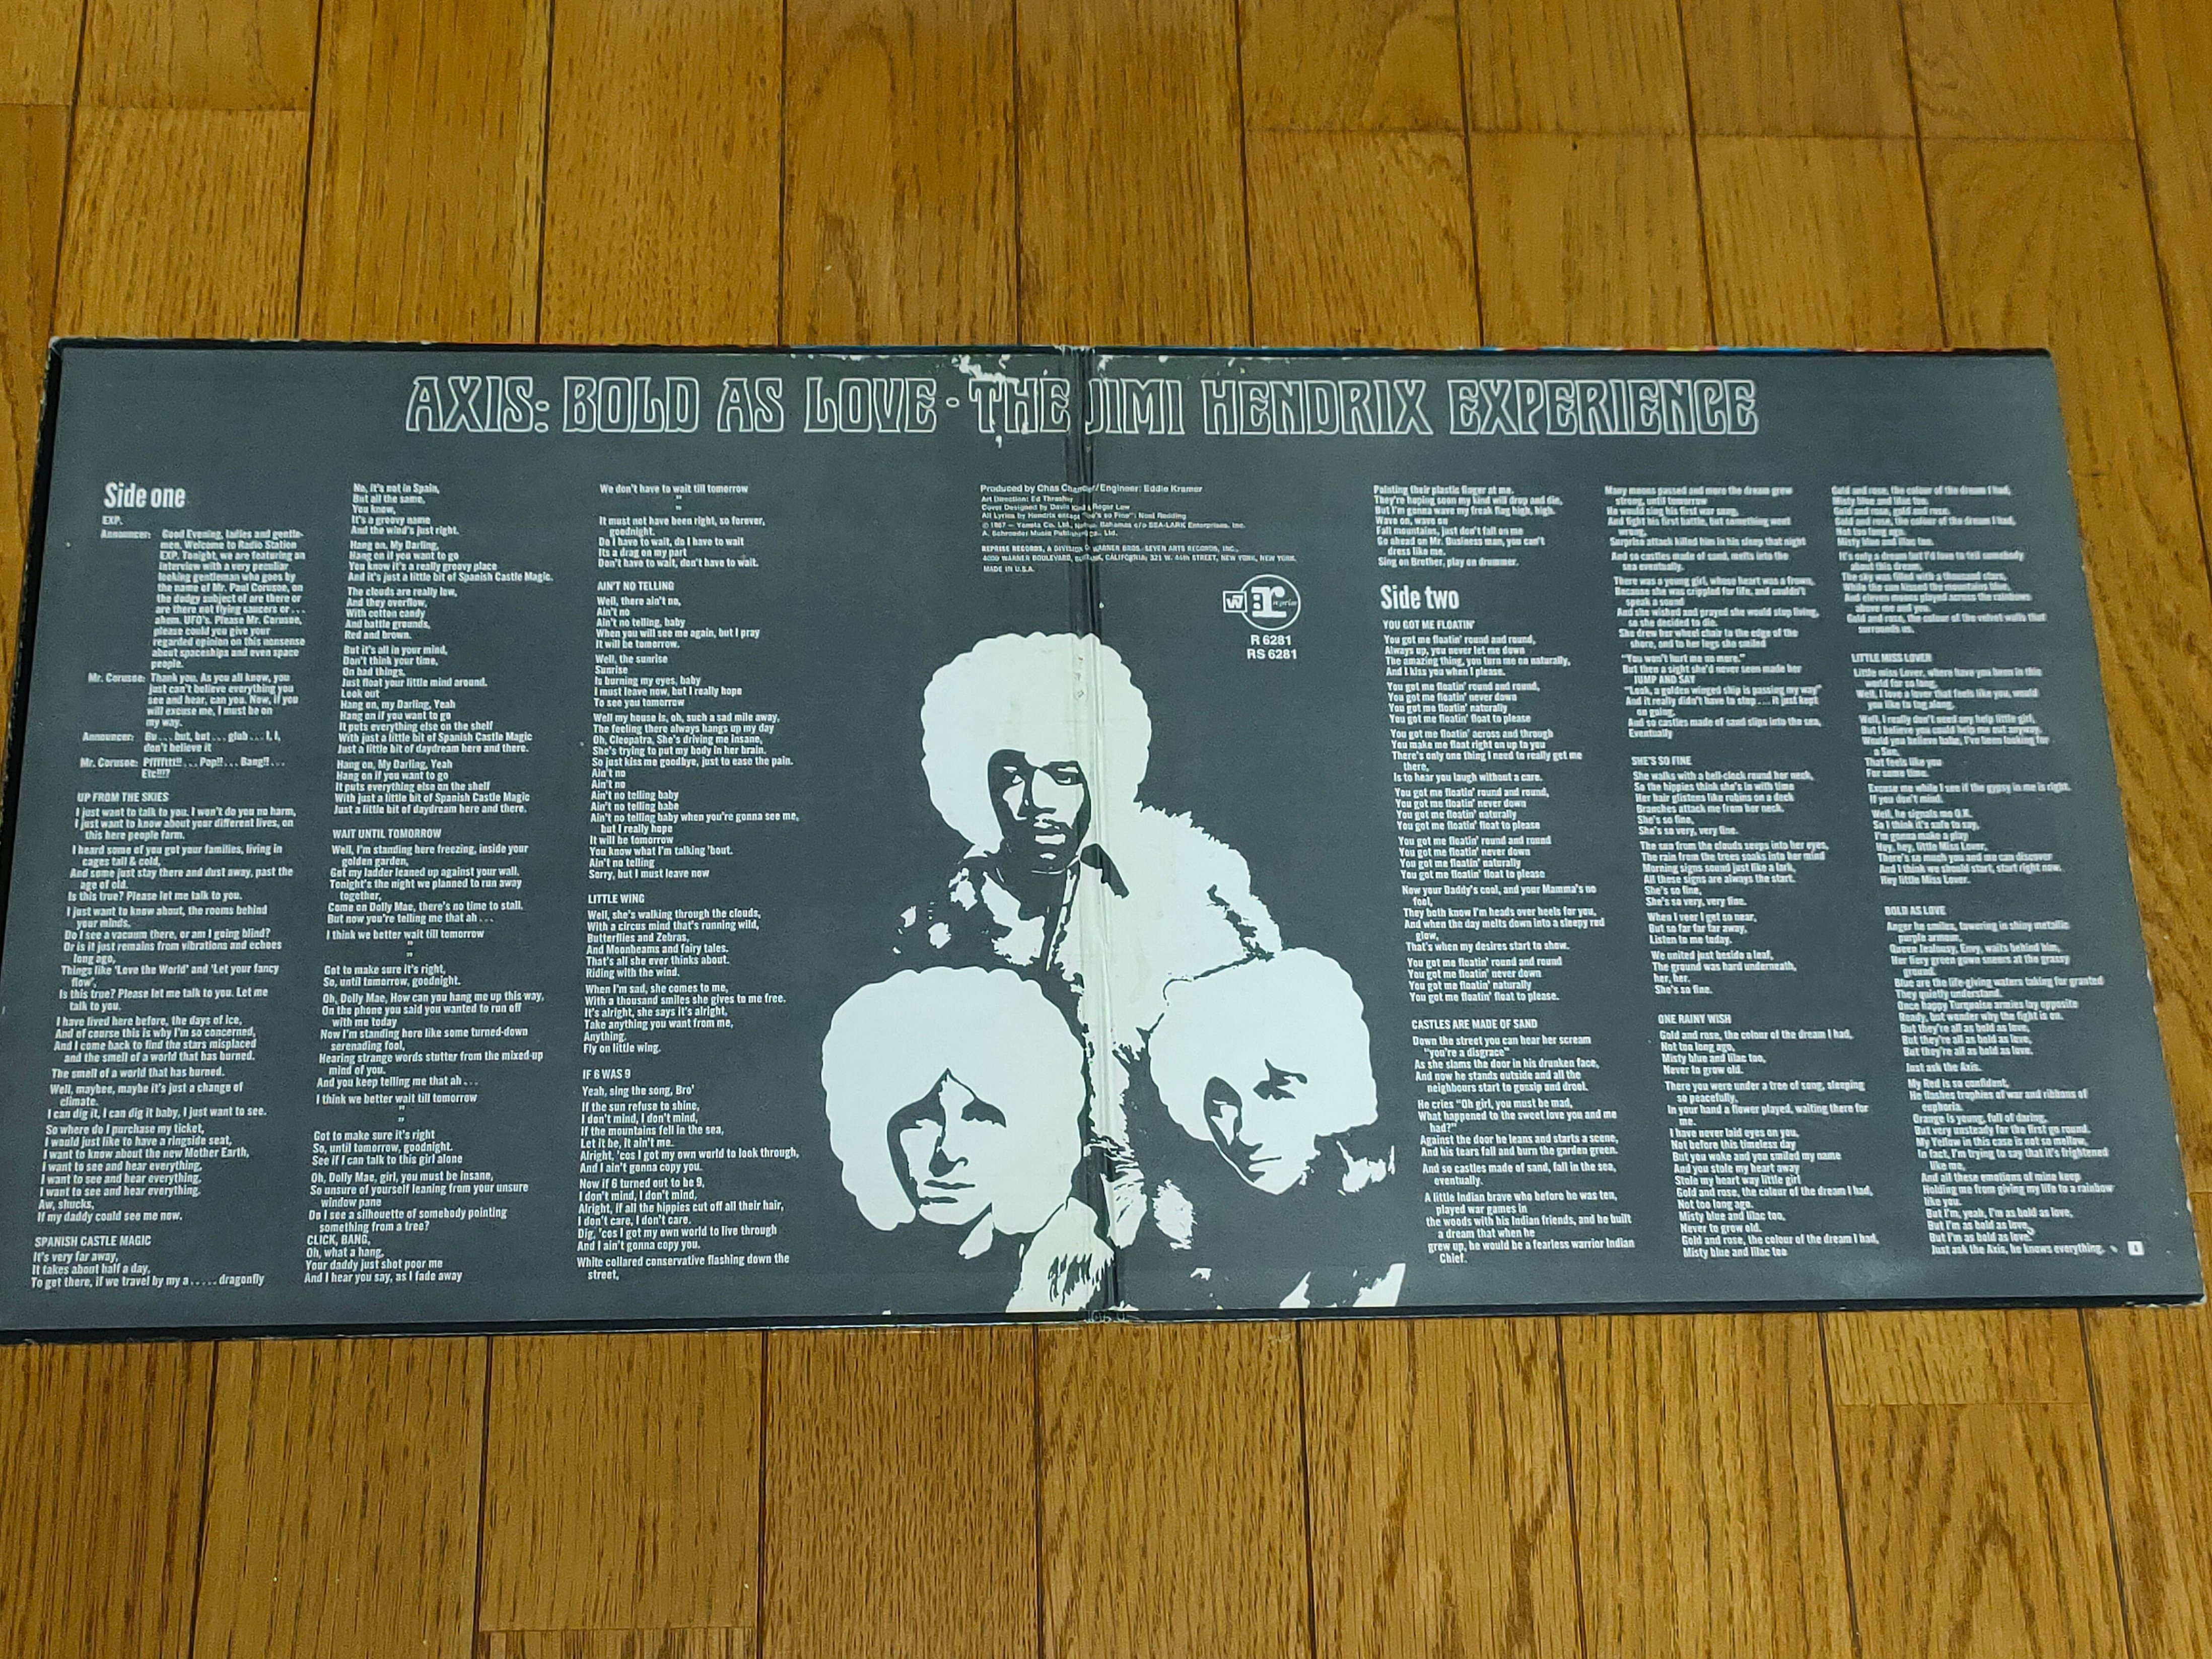 Axis: Bold as Love】(1967) The Jimi Hendrix Experien-ce 実験的で